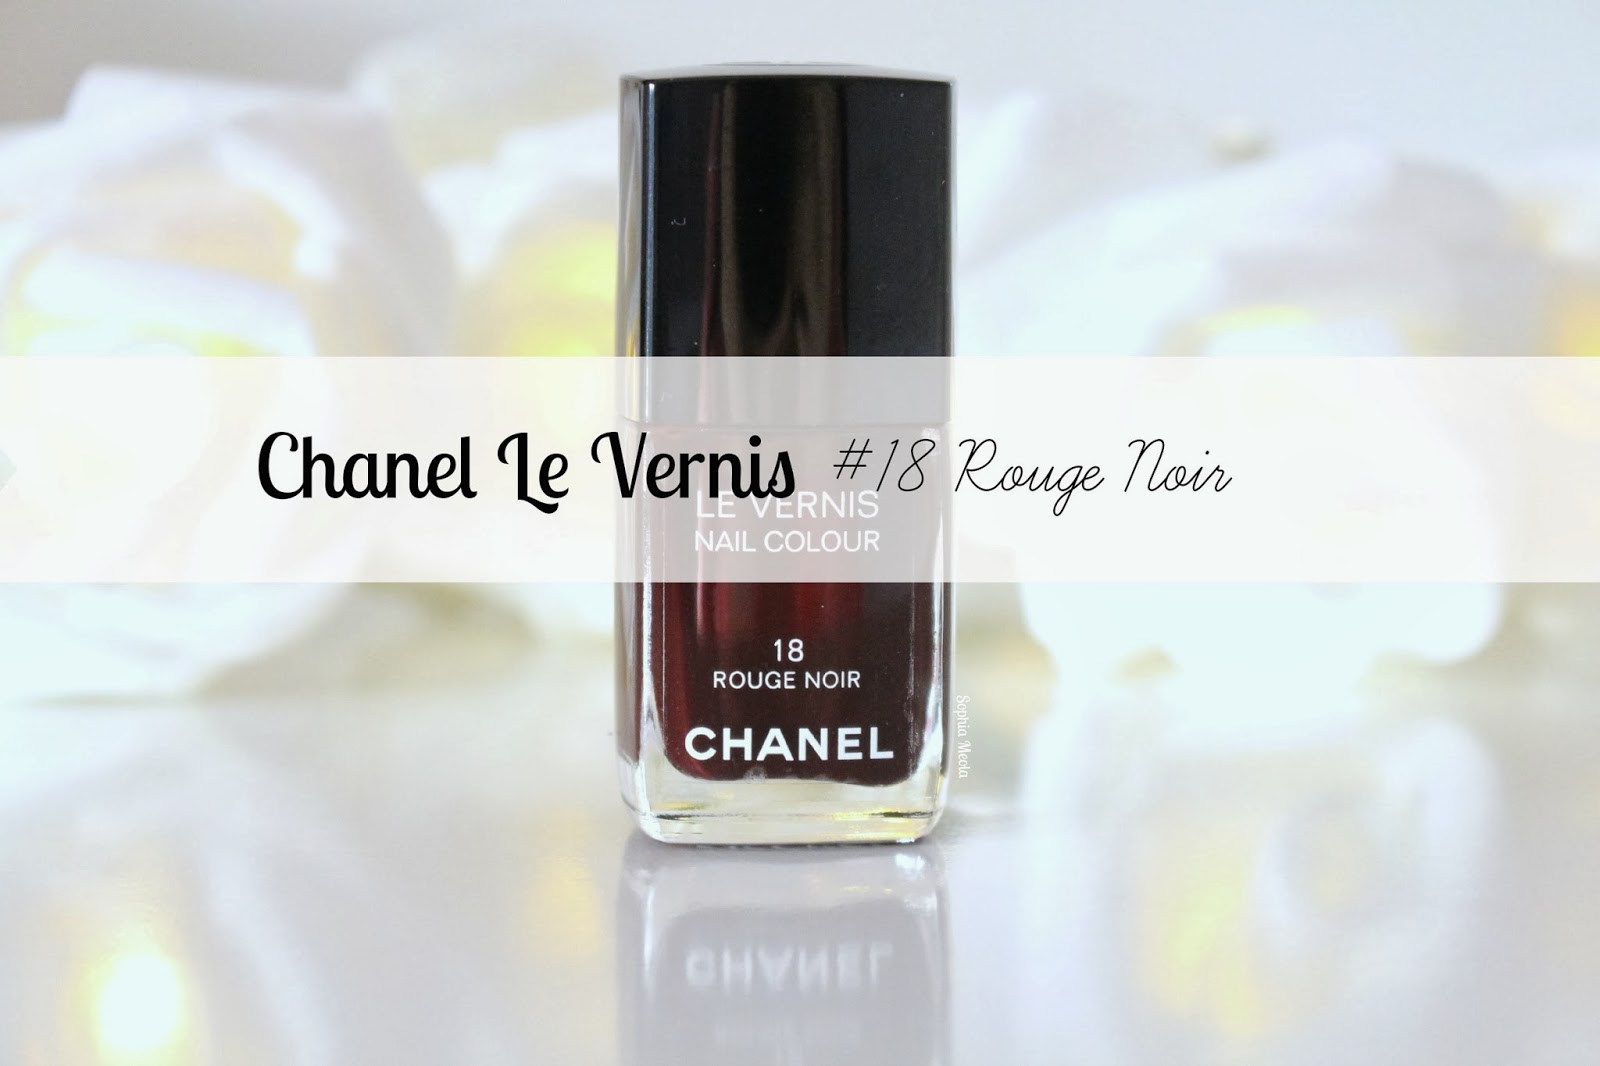 LouLouLand: An Iconic Nails Of The Day - Chanel - Rouge Noir